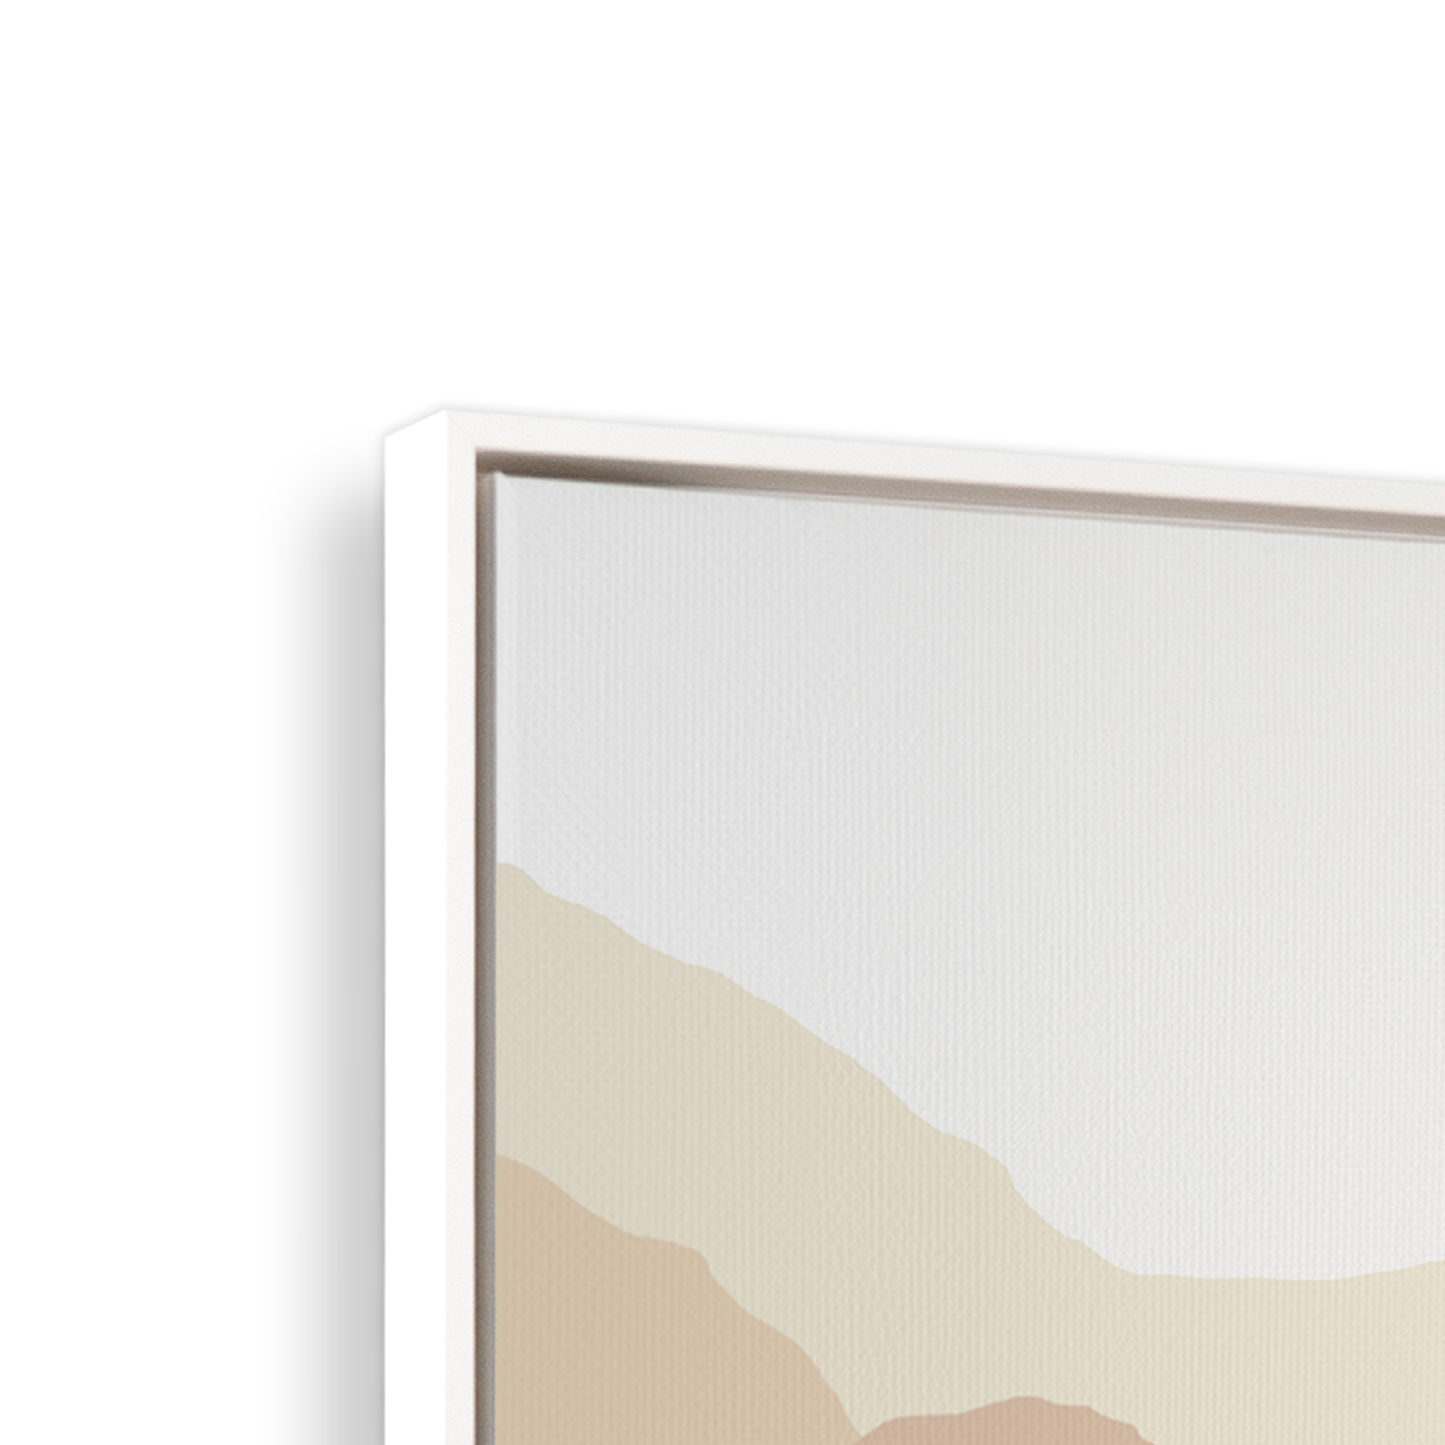 [color:Opaque White], Corner of the picture frame